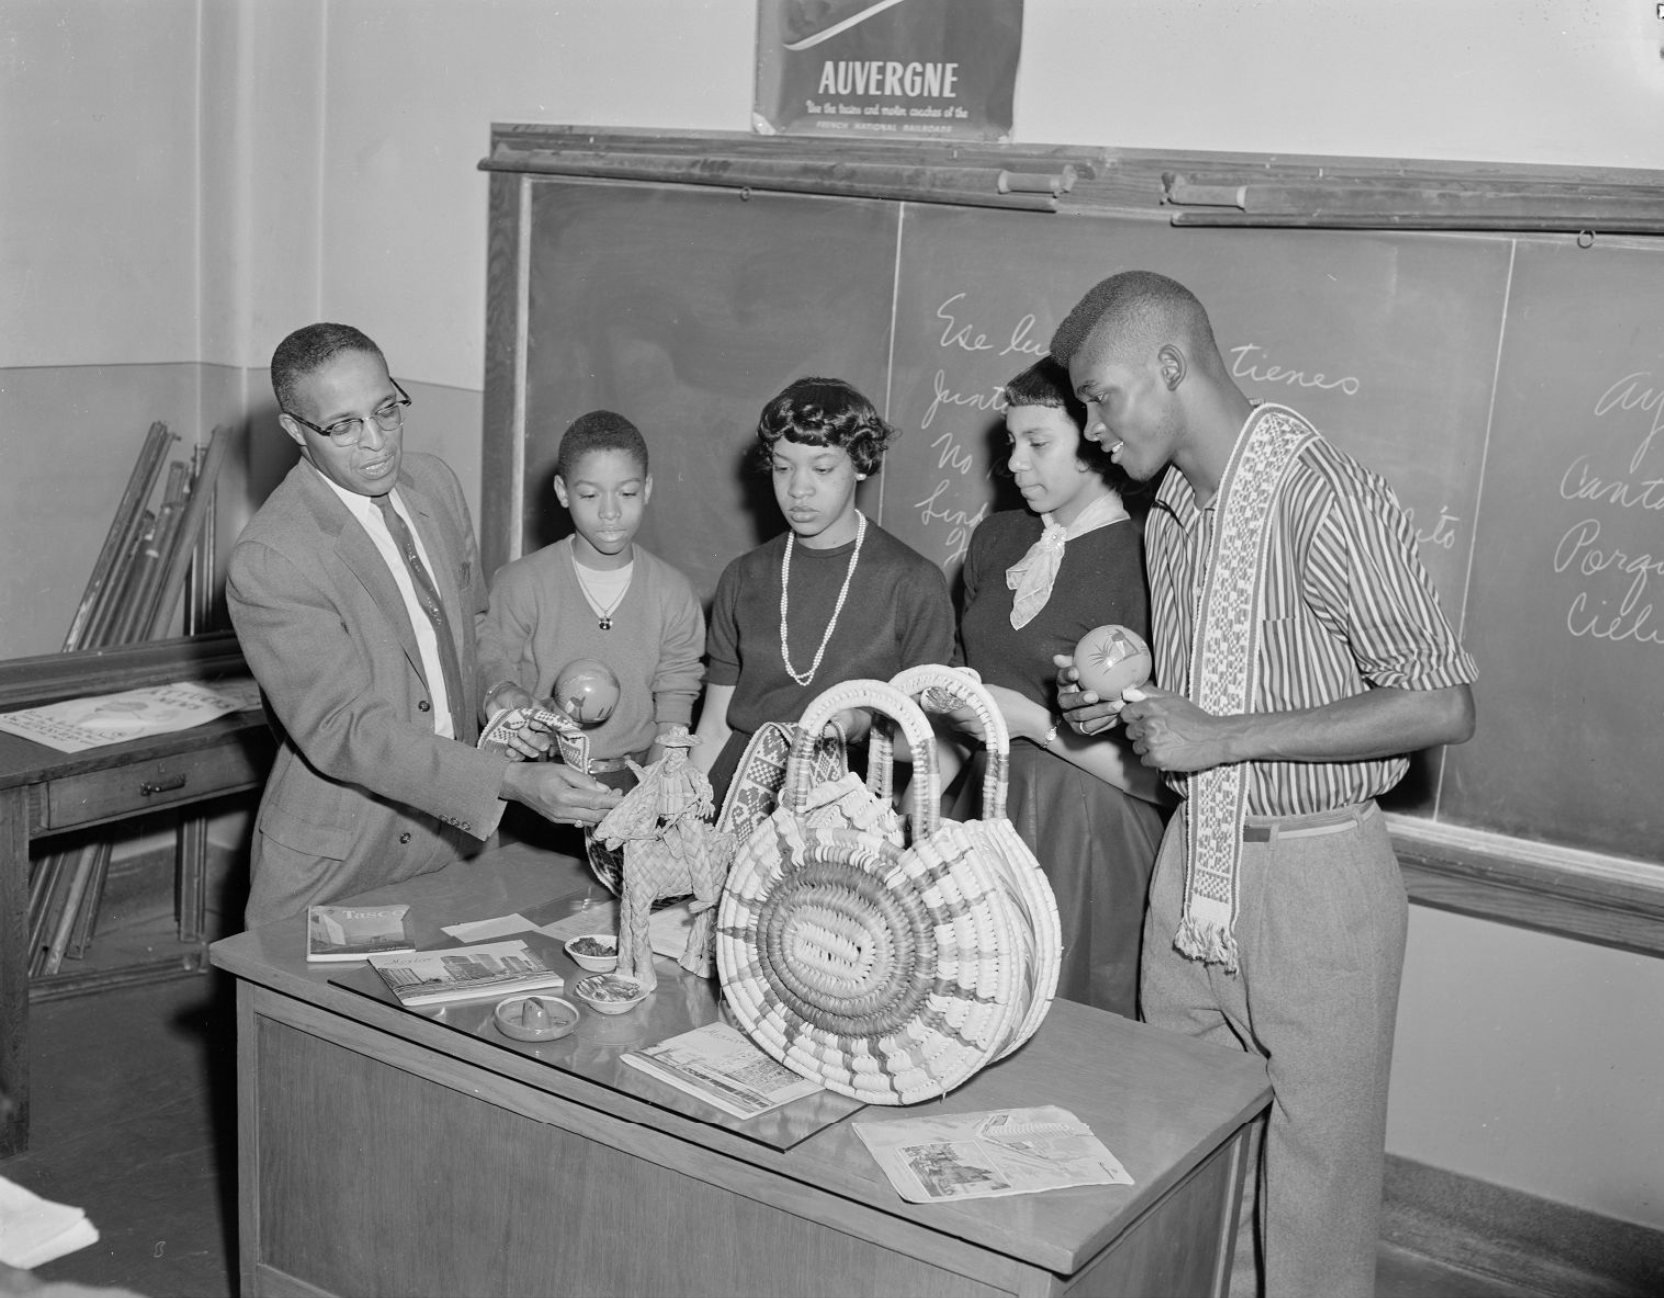 Four students gather around artifacts on a desk. Andrew Ramsey is pointing at one of the artifacts.